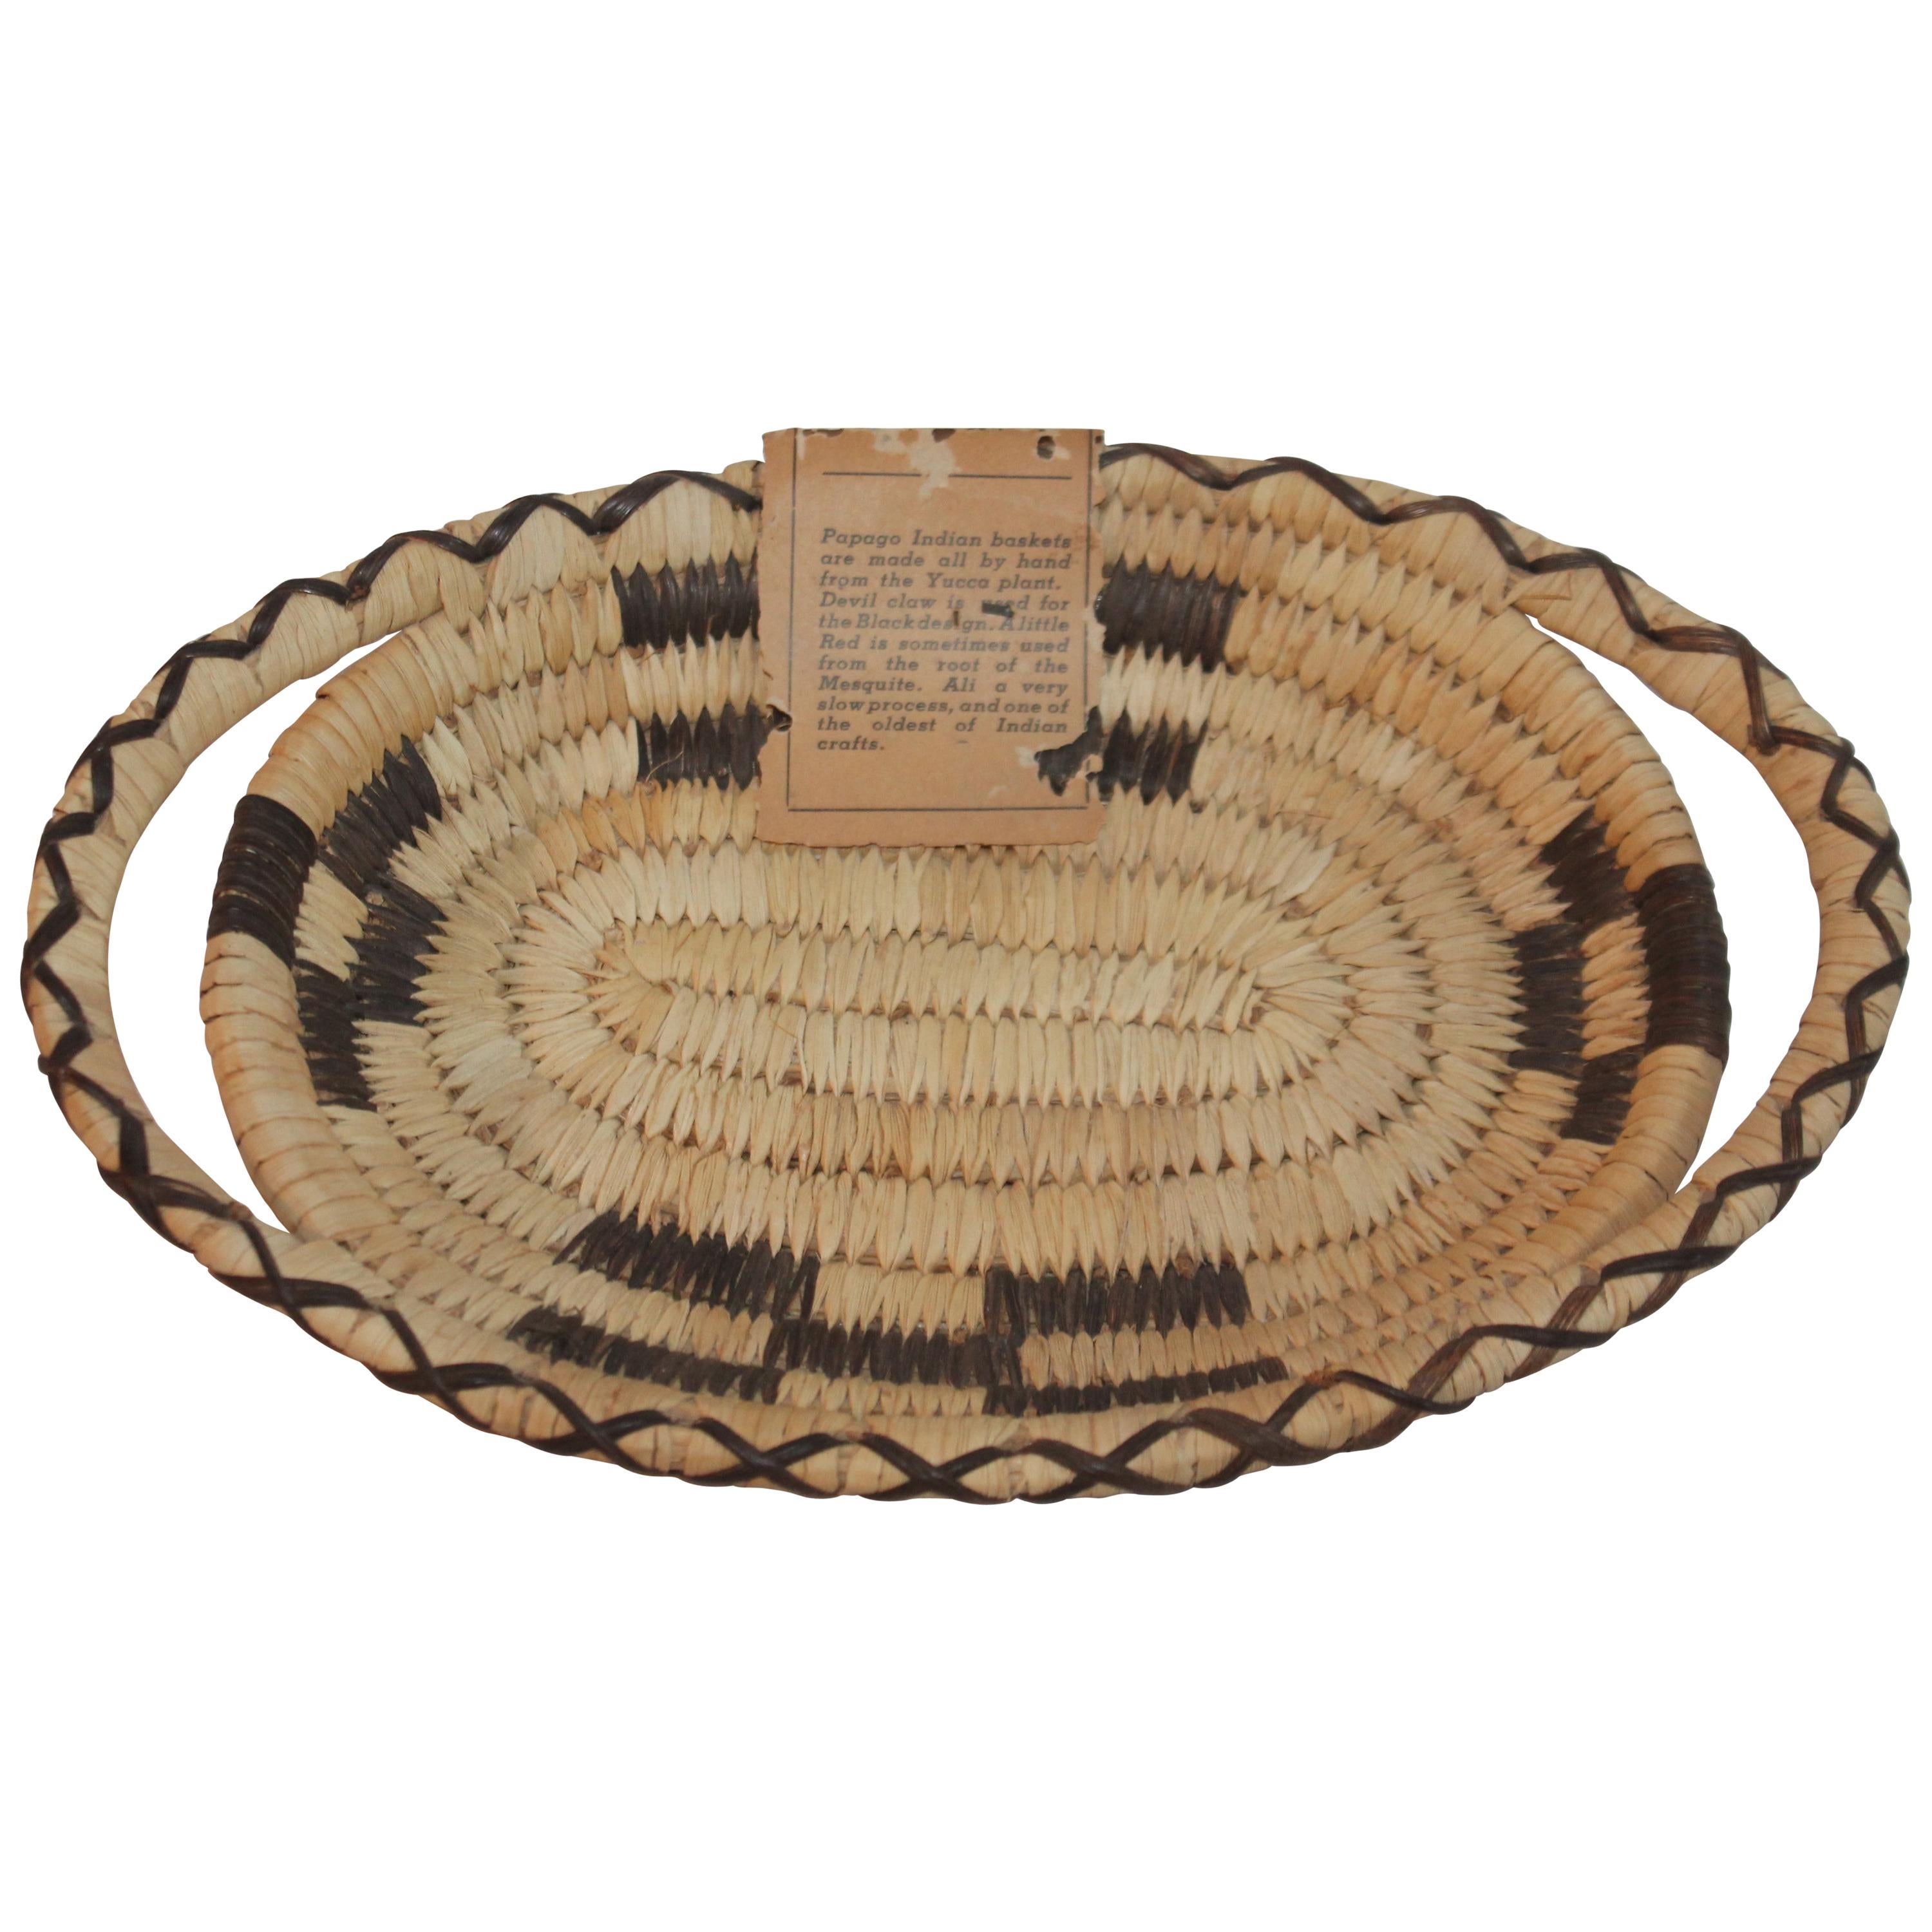 Certified Papago Arizona Basket with the Original Papers For Sale